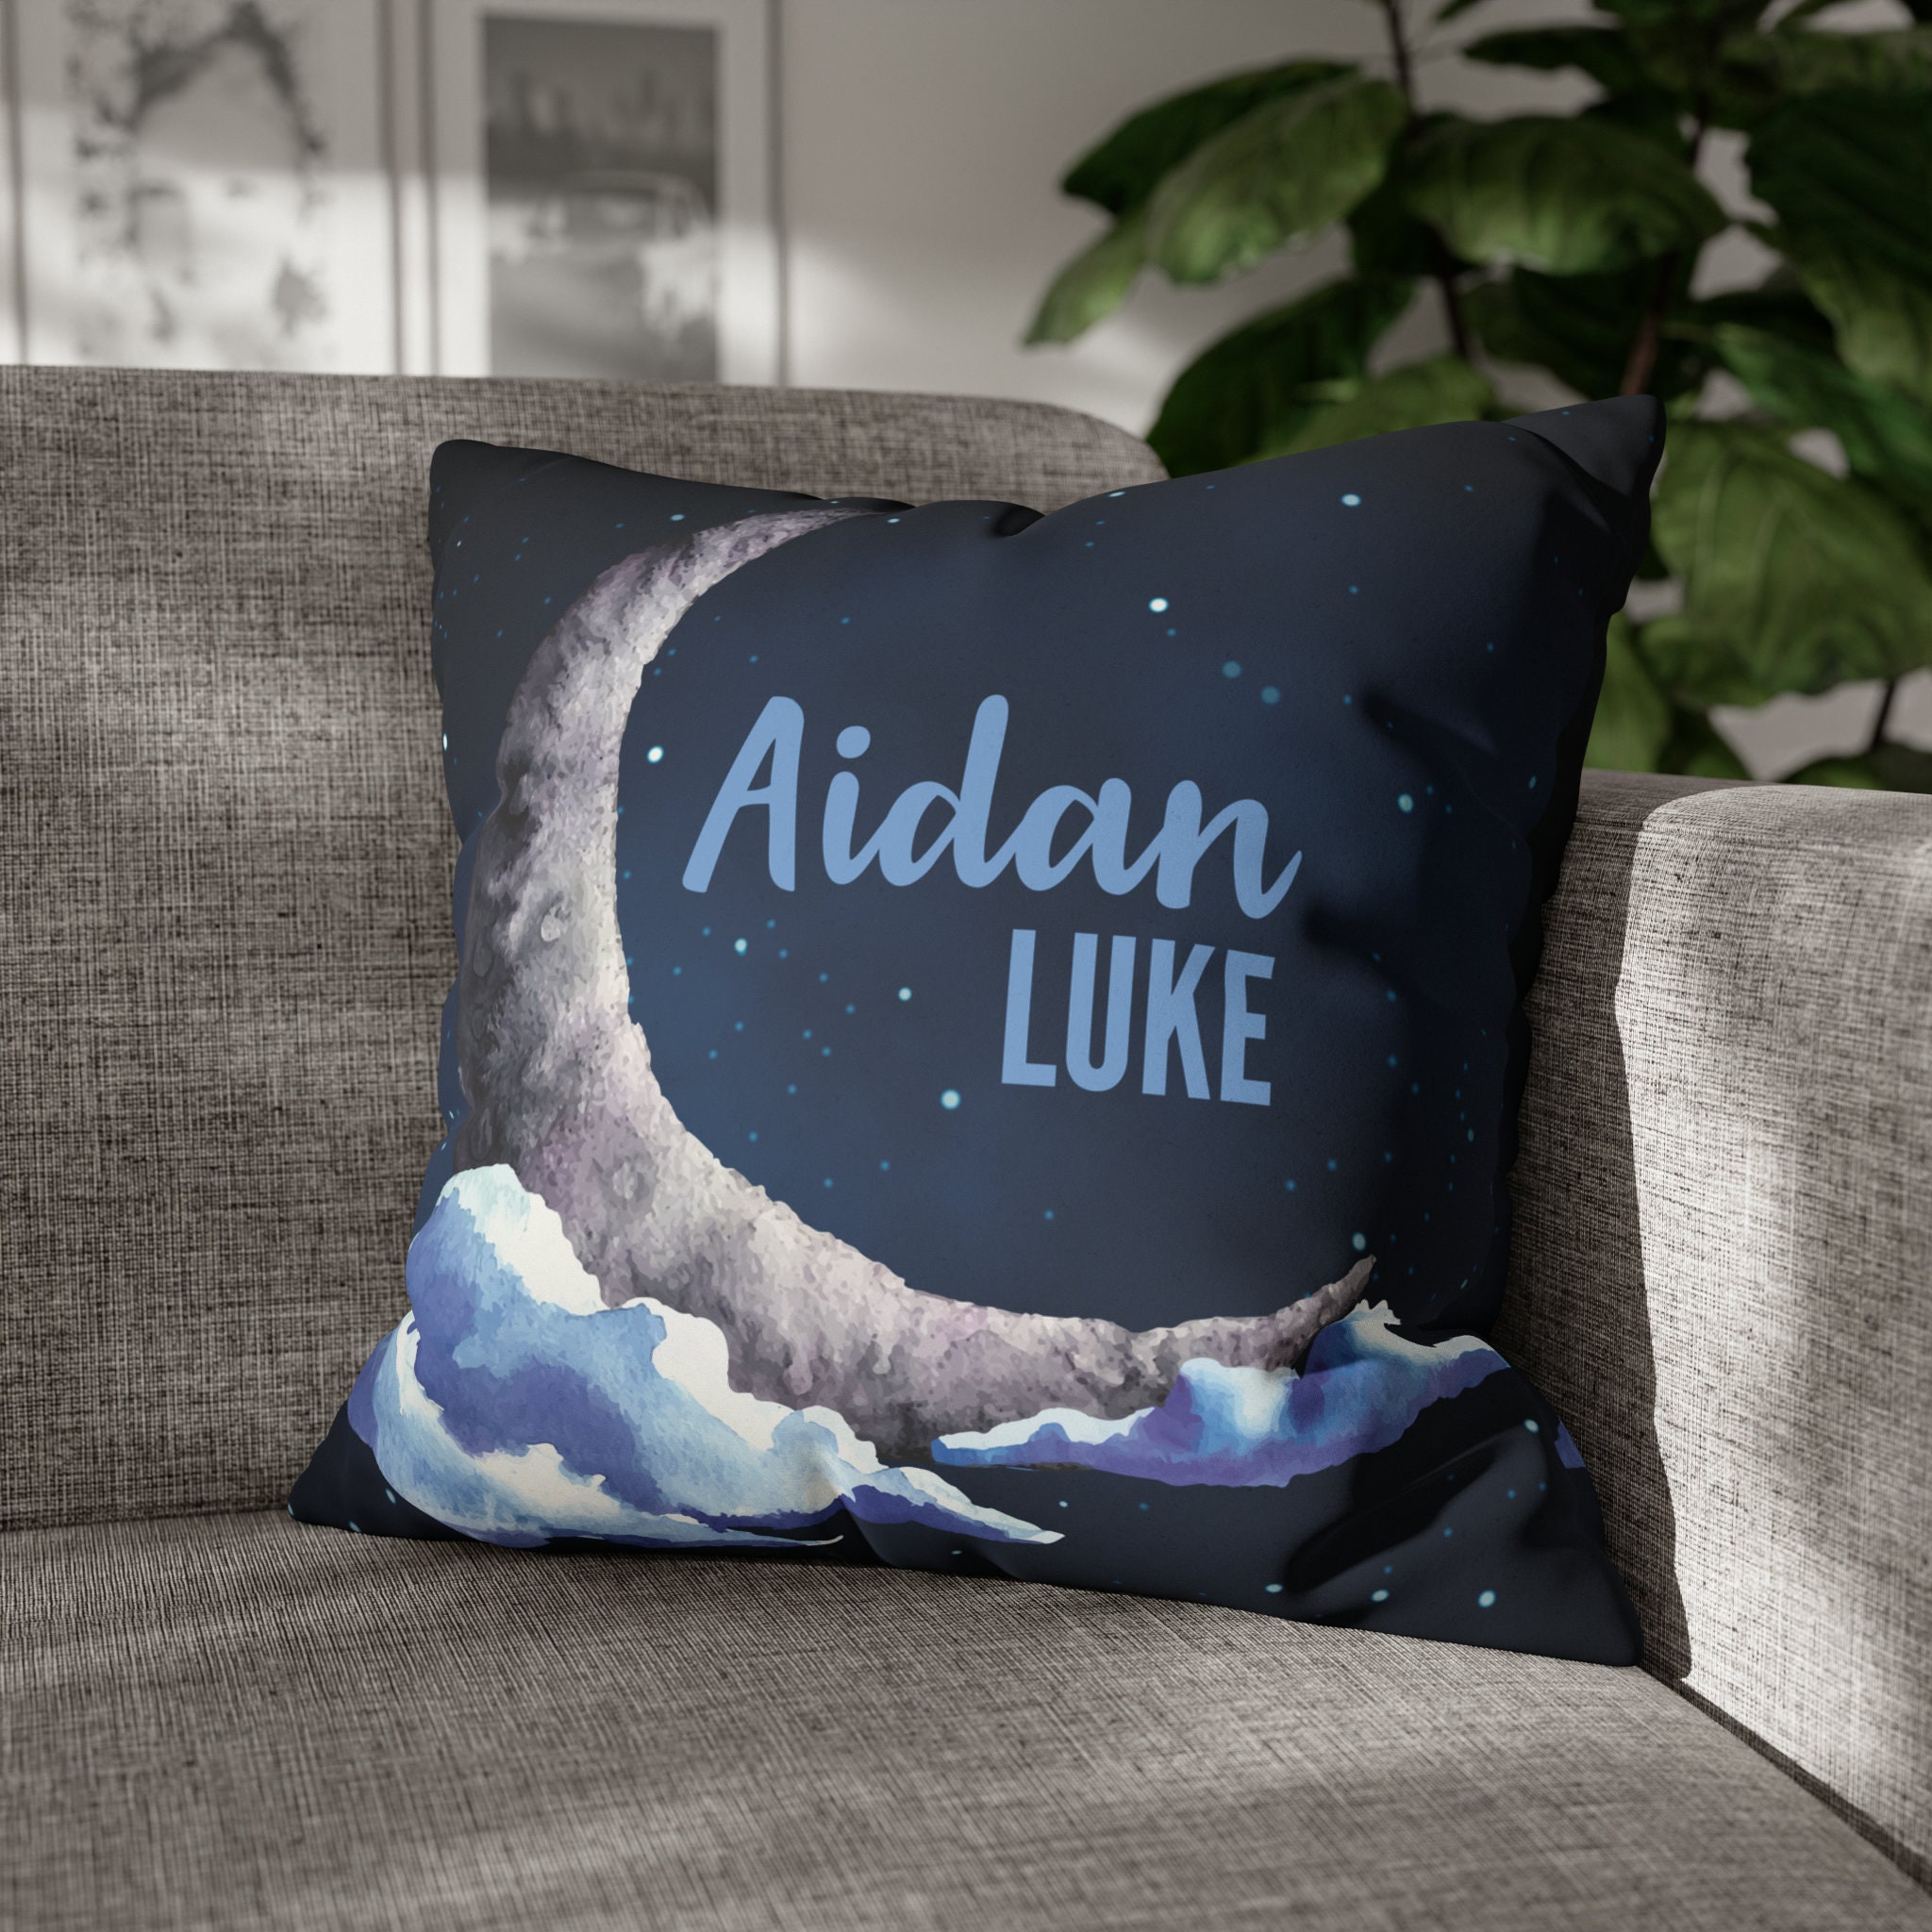 Space Personalized 18-inch Baby Throw Pillow